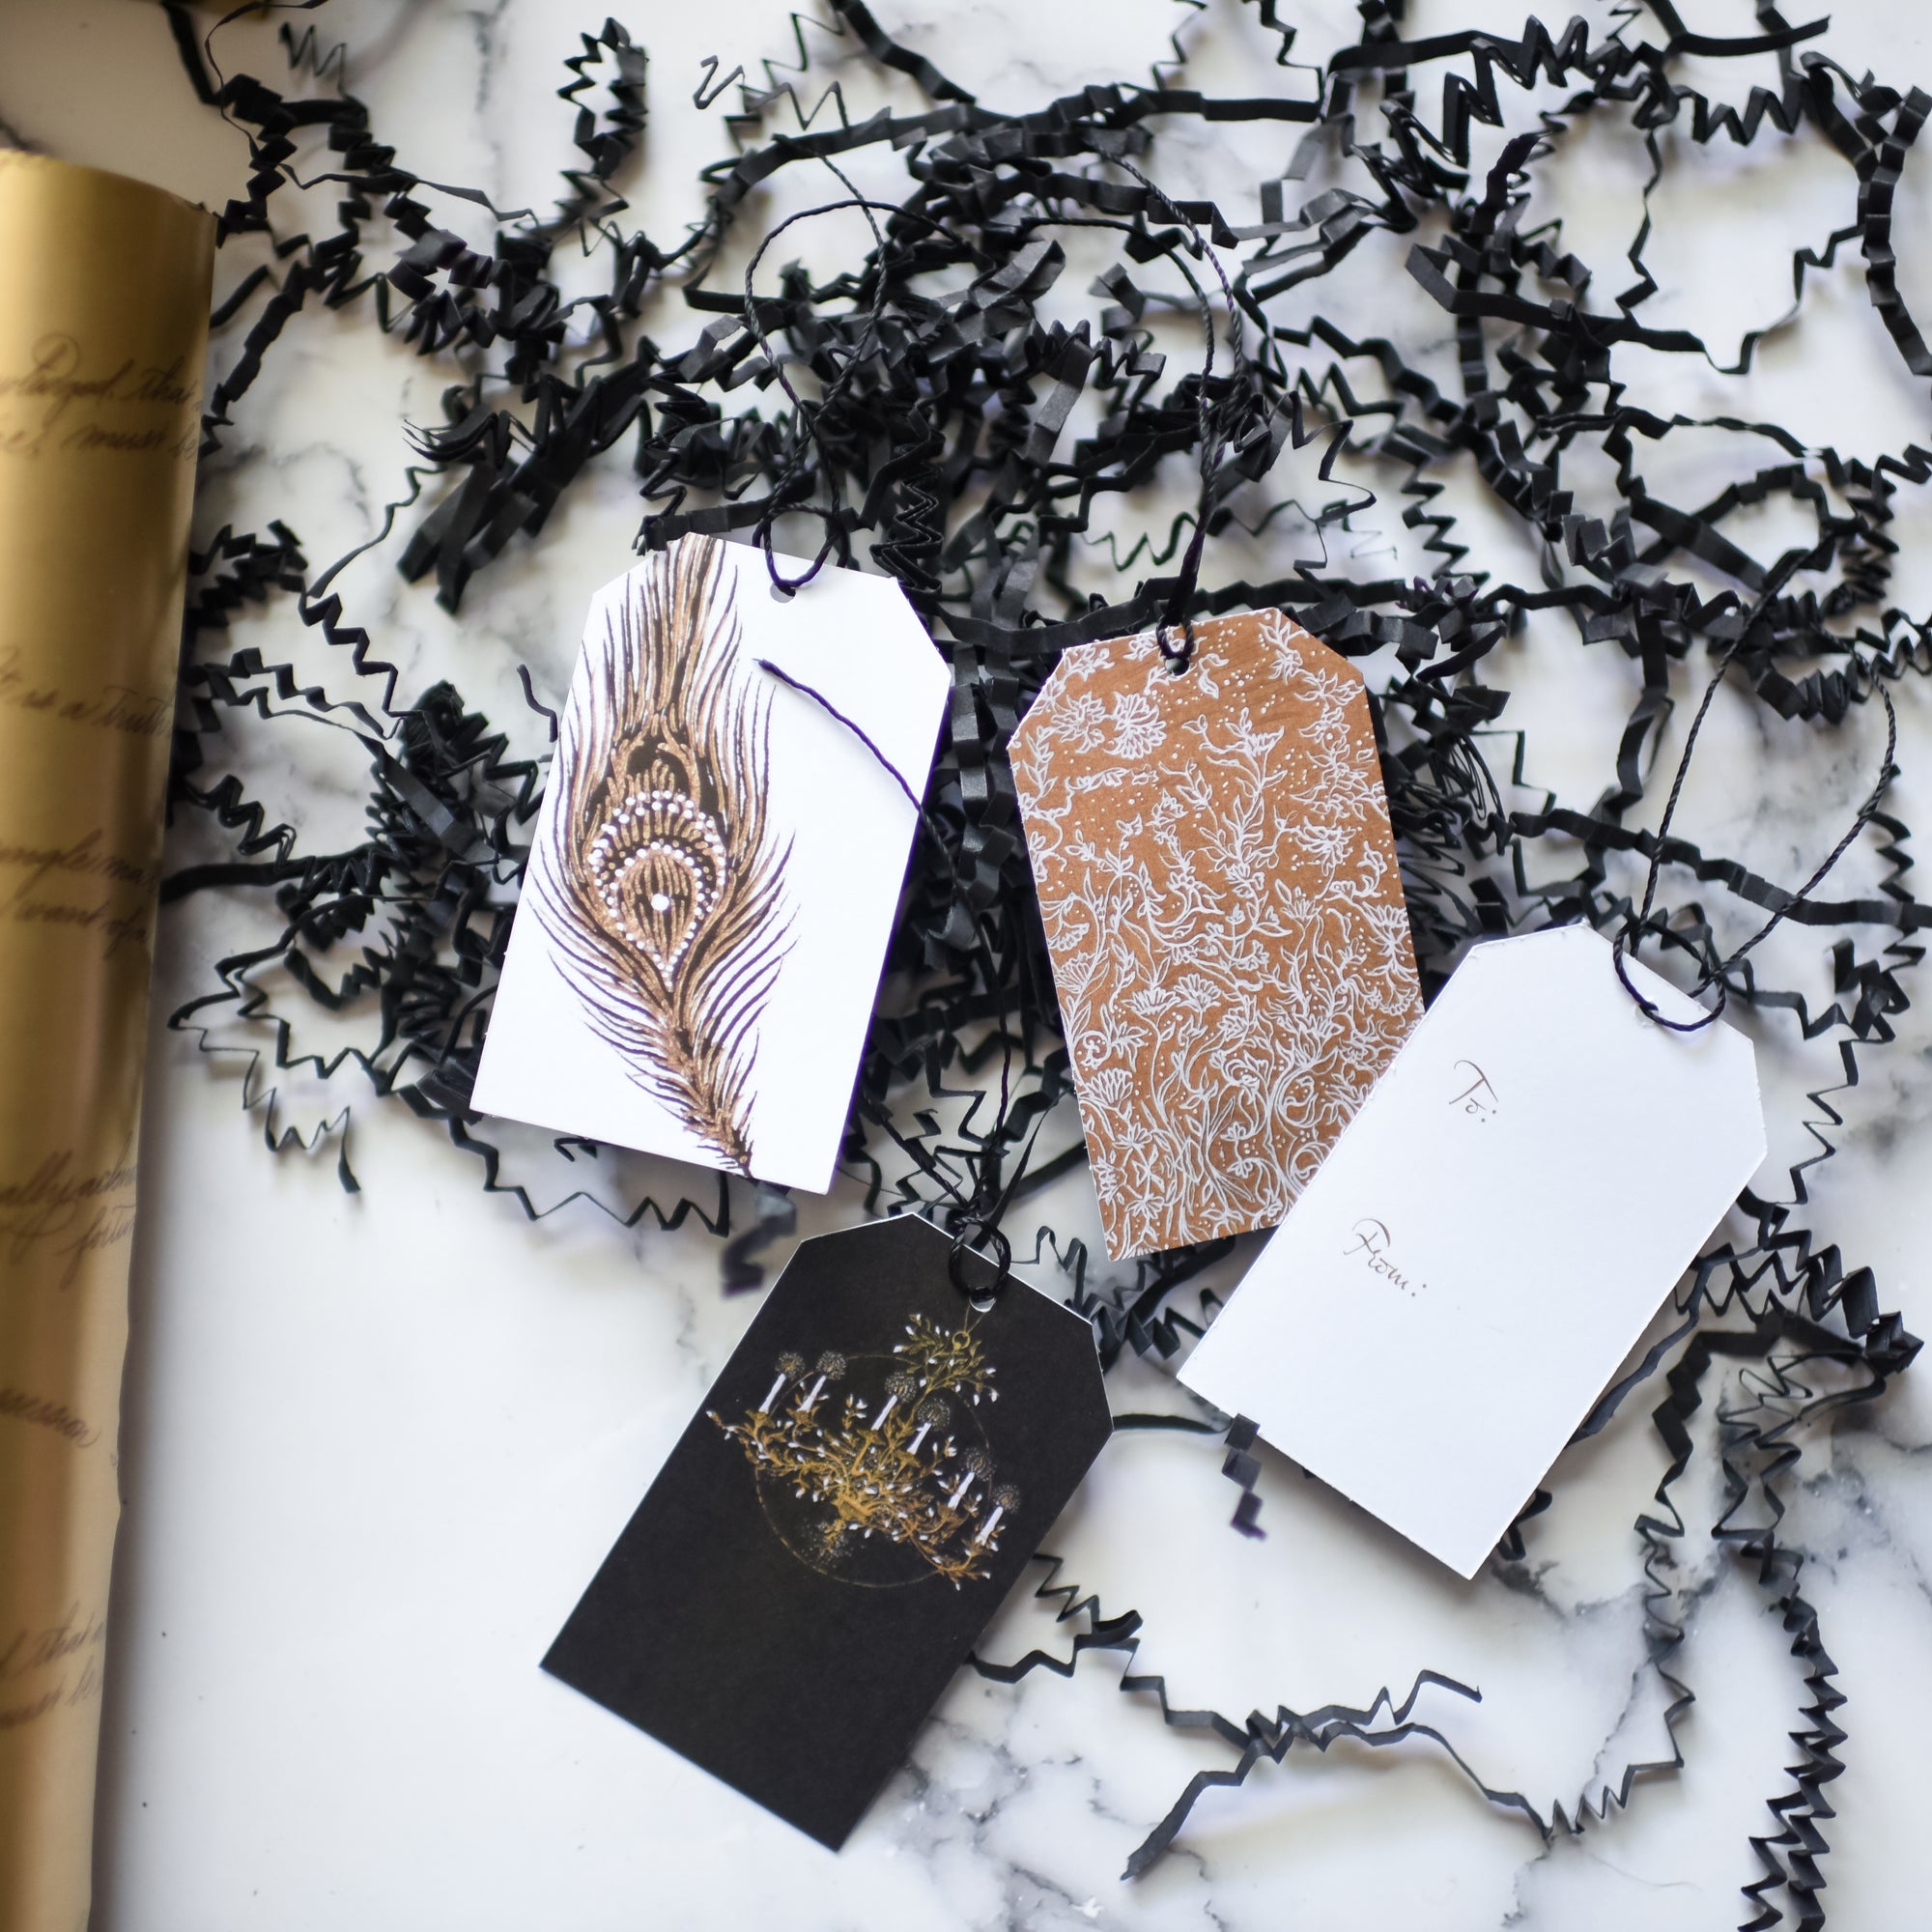 Black, gold, and white Classic Literature Gift Tags with romantic classics themes and white backing with "to" and "from"